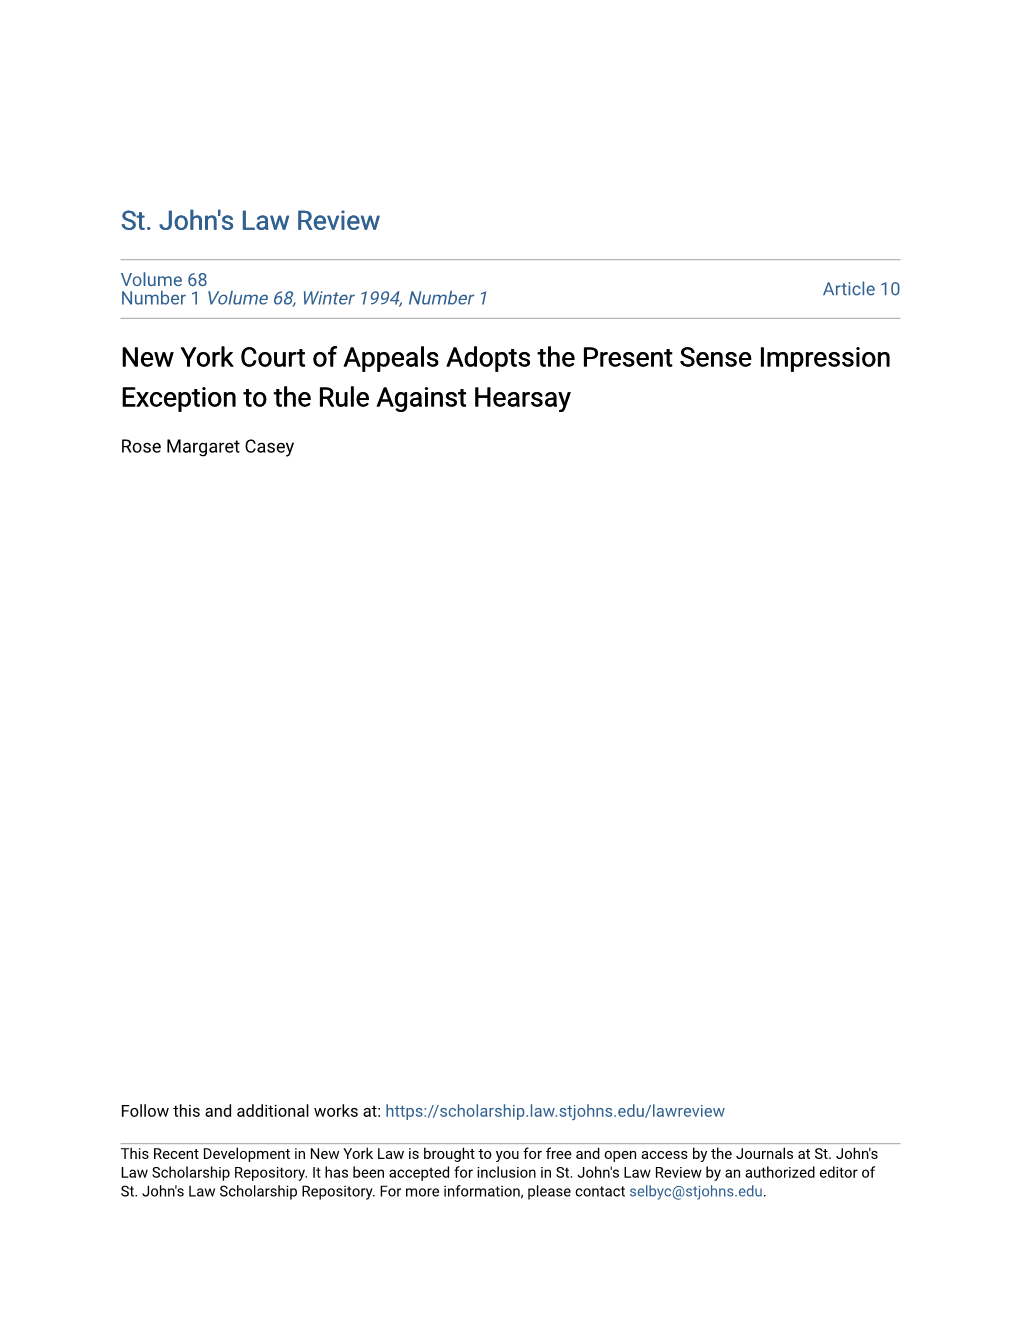 New York Court of Appeals Adopts the Present Sense Impression Exception to the Rule Against Hearsay